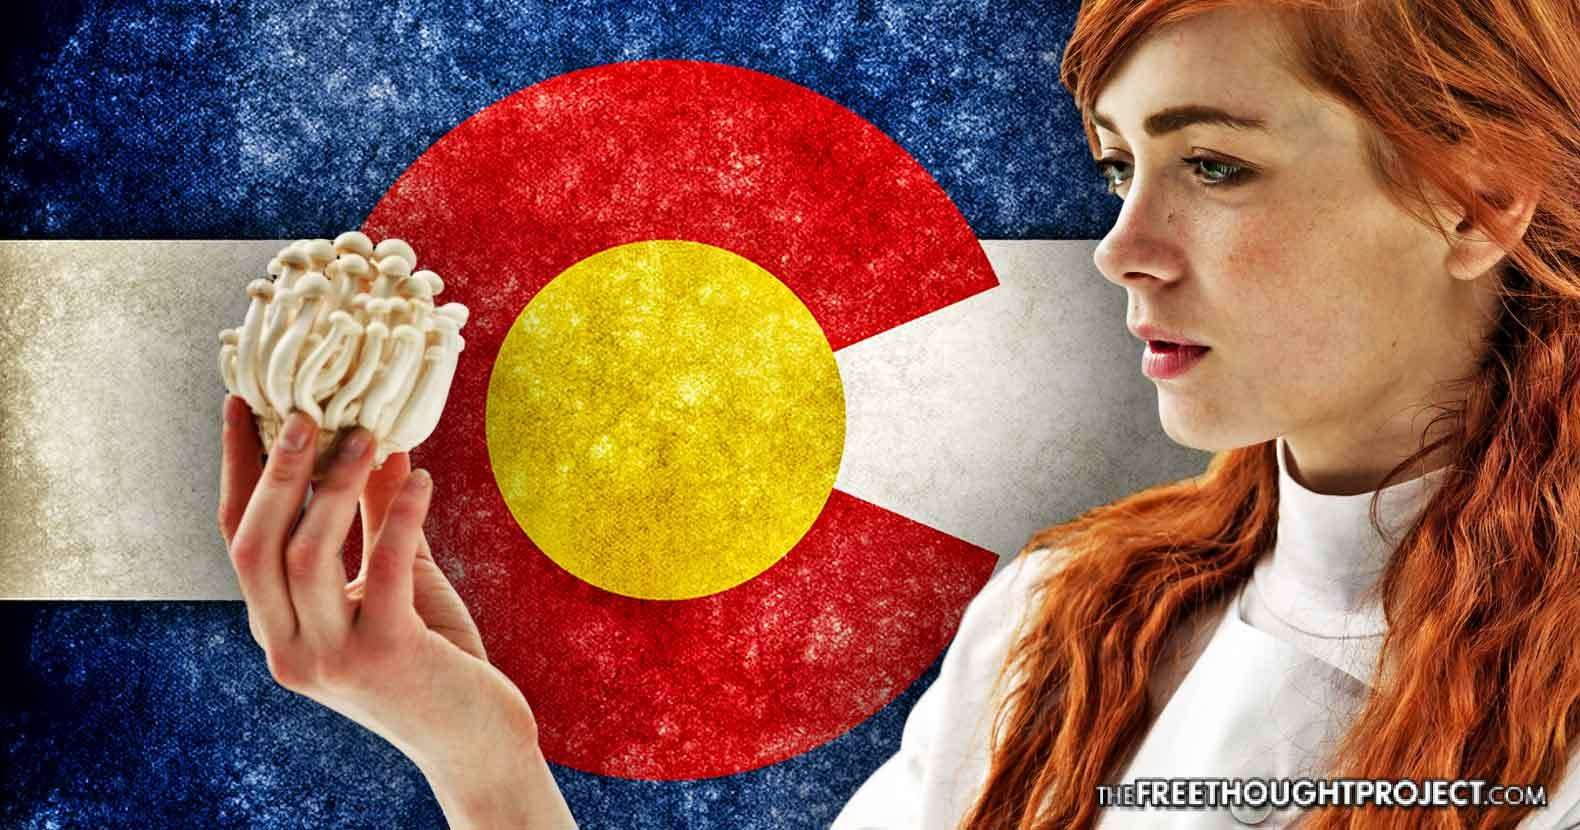 image for After Legal Weed, Colorado Now Taking Steps to Legalize Magic Mushrooms